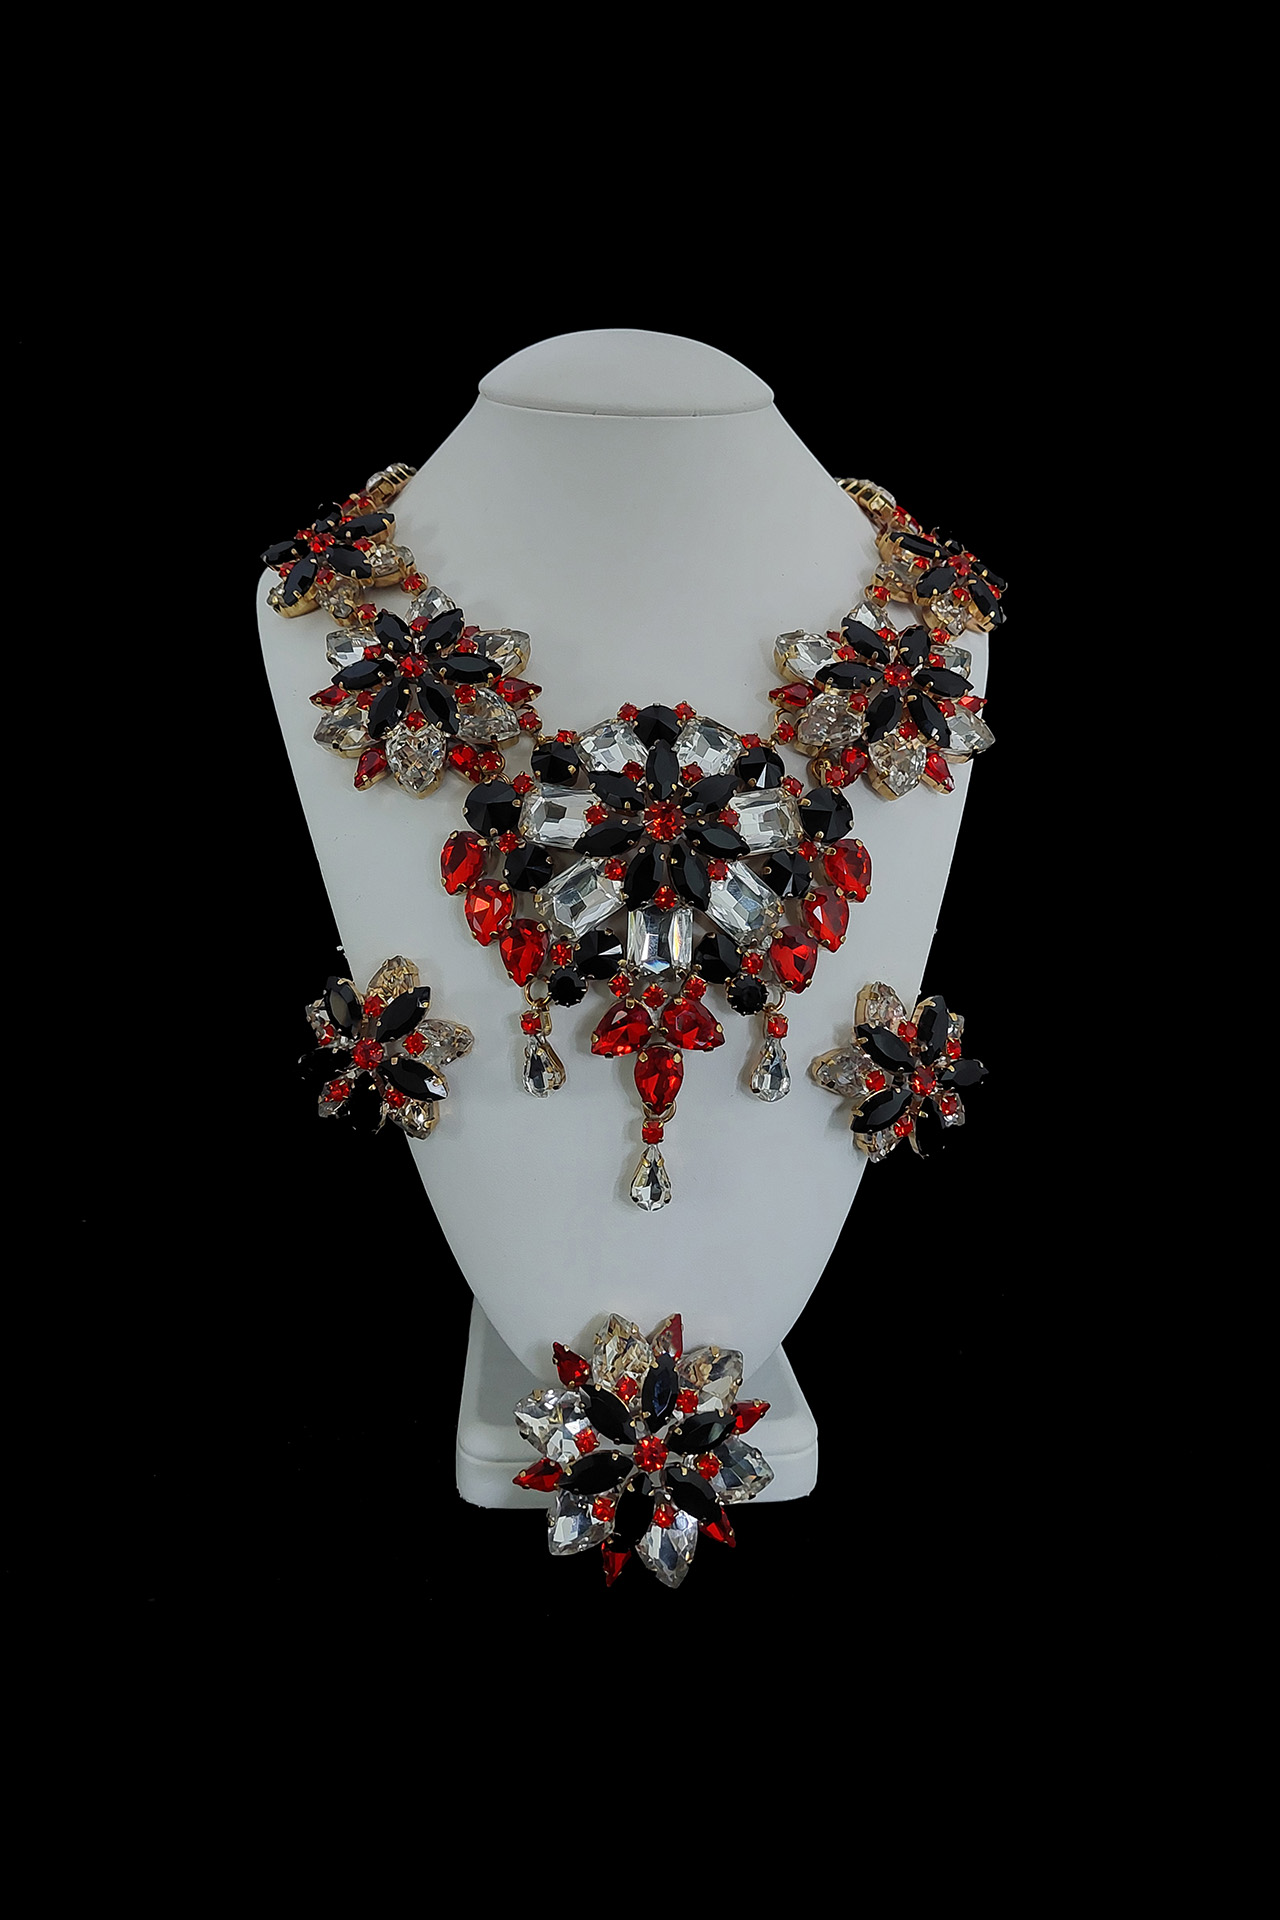 Vibrant multicolor earrings, brooche and necklace set Blossom